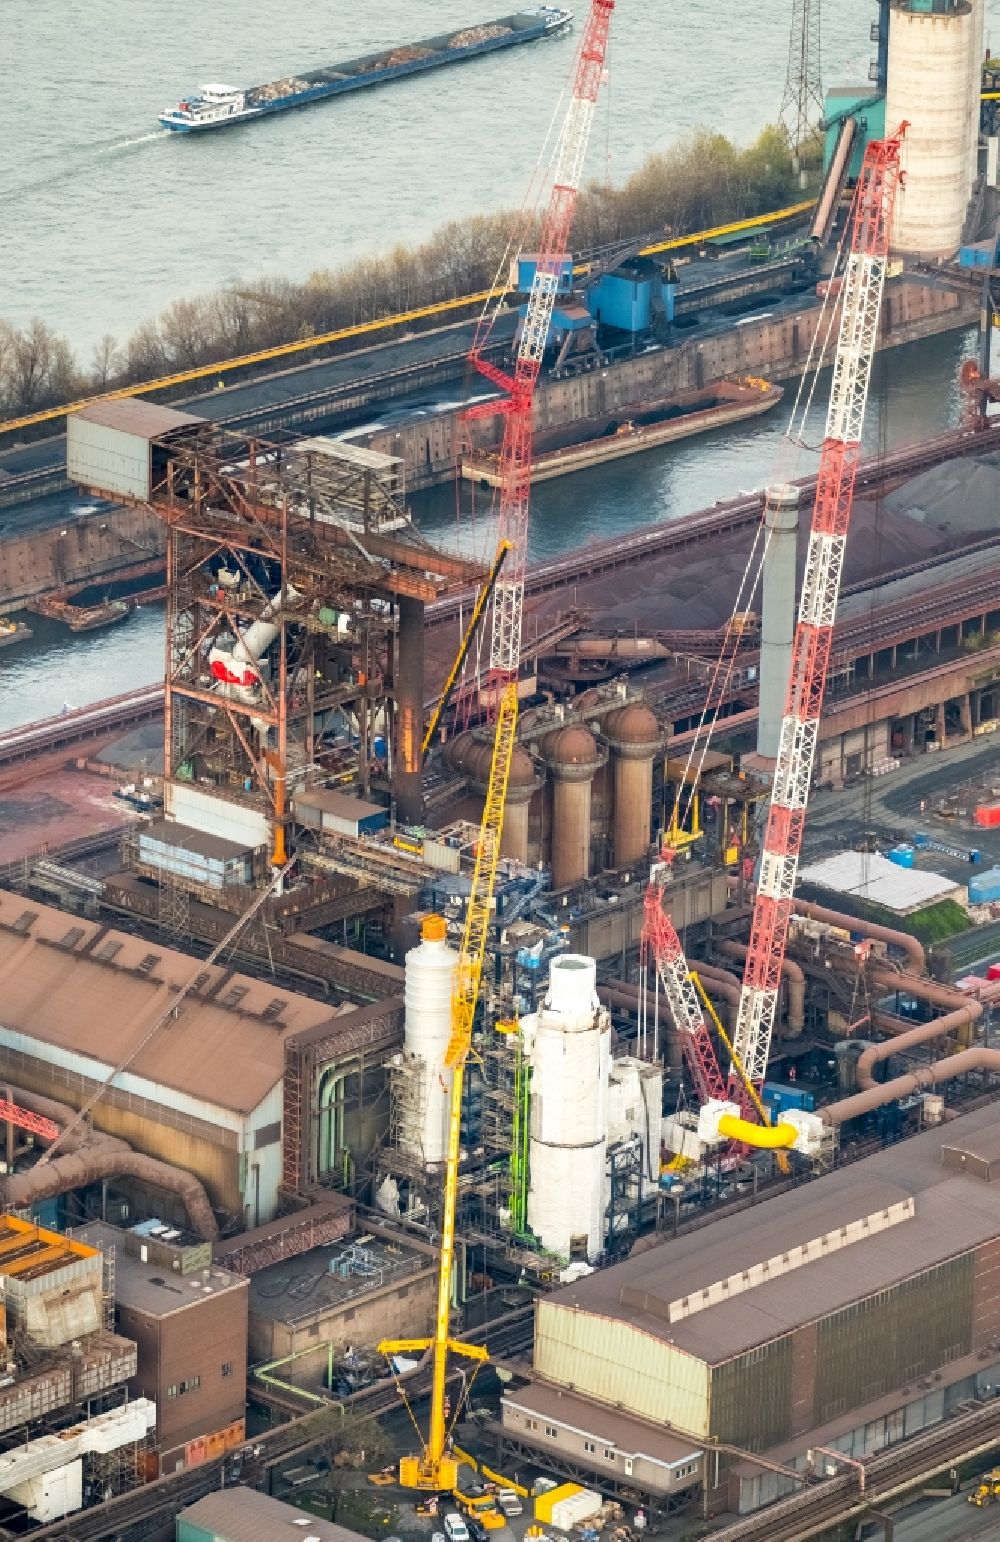 Aerial image Duisburg - Technical equipment and production facilities of the steelworks Huettenwerke Krupp Mannesmann GmbH in Duisburg in the state North Rhine-Westphalia